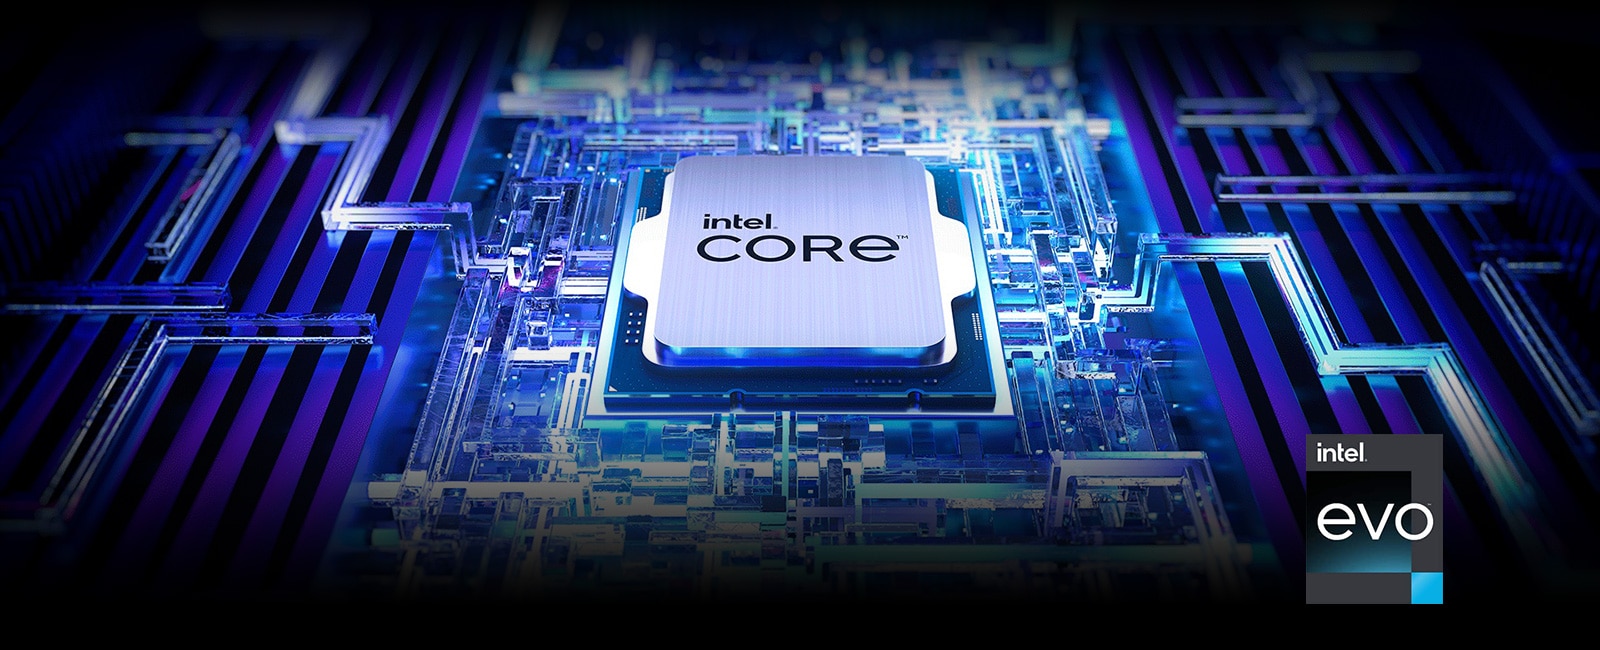 It shows the  Intel® Core™ chip.